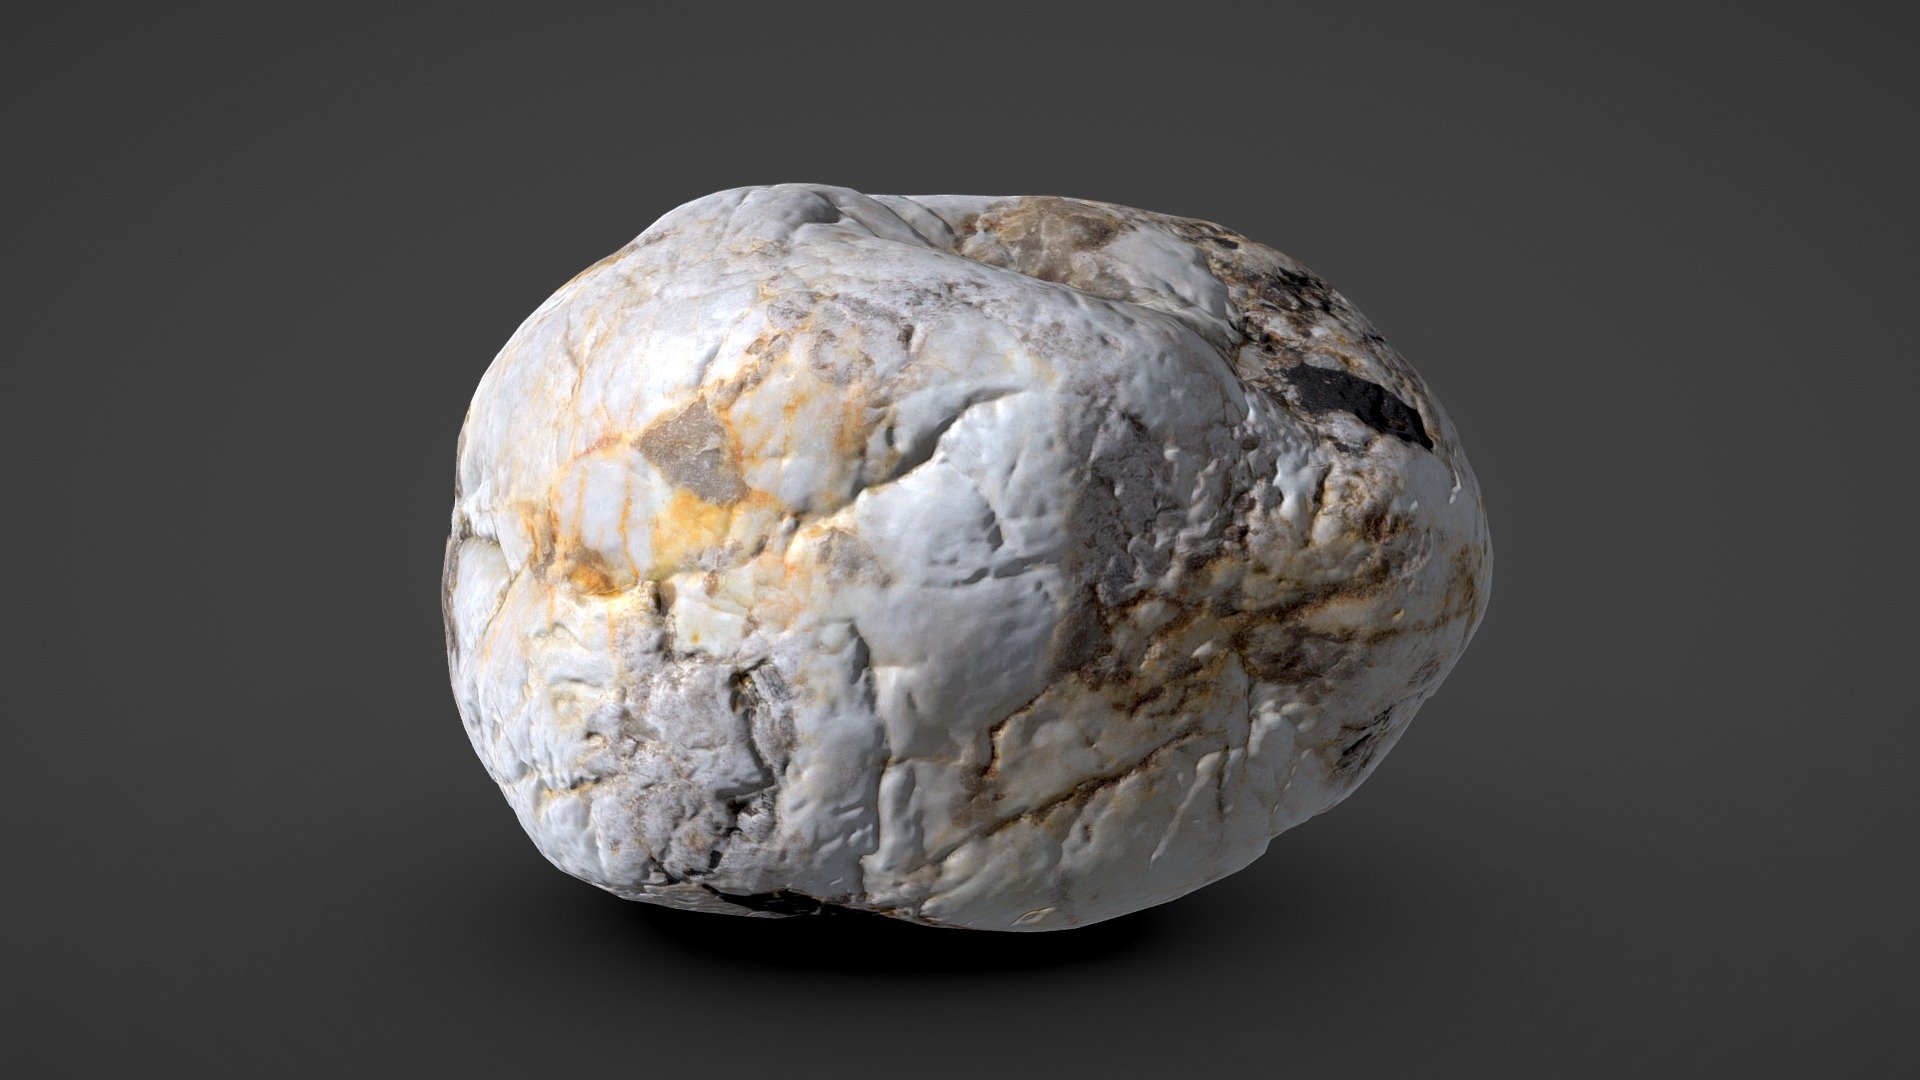 An interesting rock found on the beach of Moguériec in France and scanned with Metashape.

The model previewed here is made of 5k triangles and has 4096x4096 textures (basecolor, ao and normal map), and the additional archive attached to this model contains LODs in different formats:


obj: basecolor, ao, normal map
abc: basecolor only
gltf: basecolor only, errors on white balance (will appear &ldquo;more orangeish